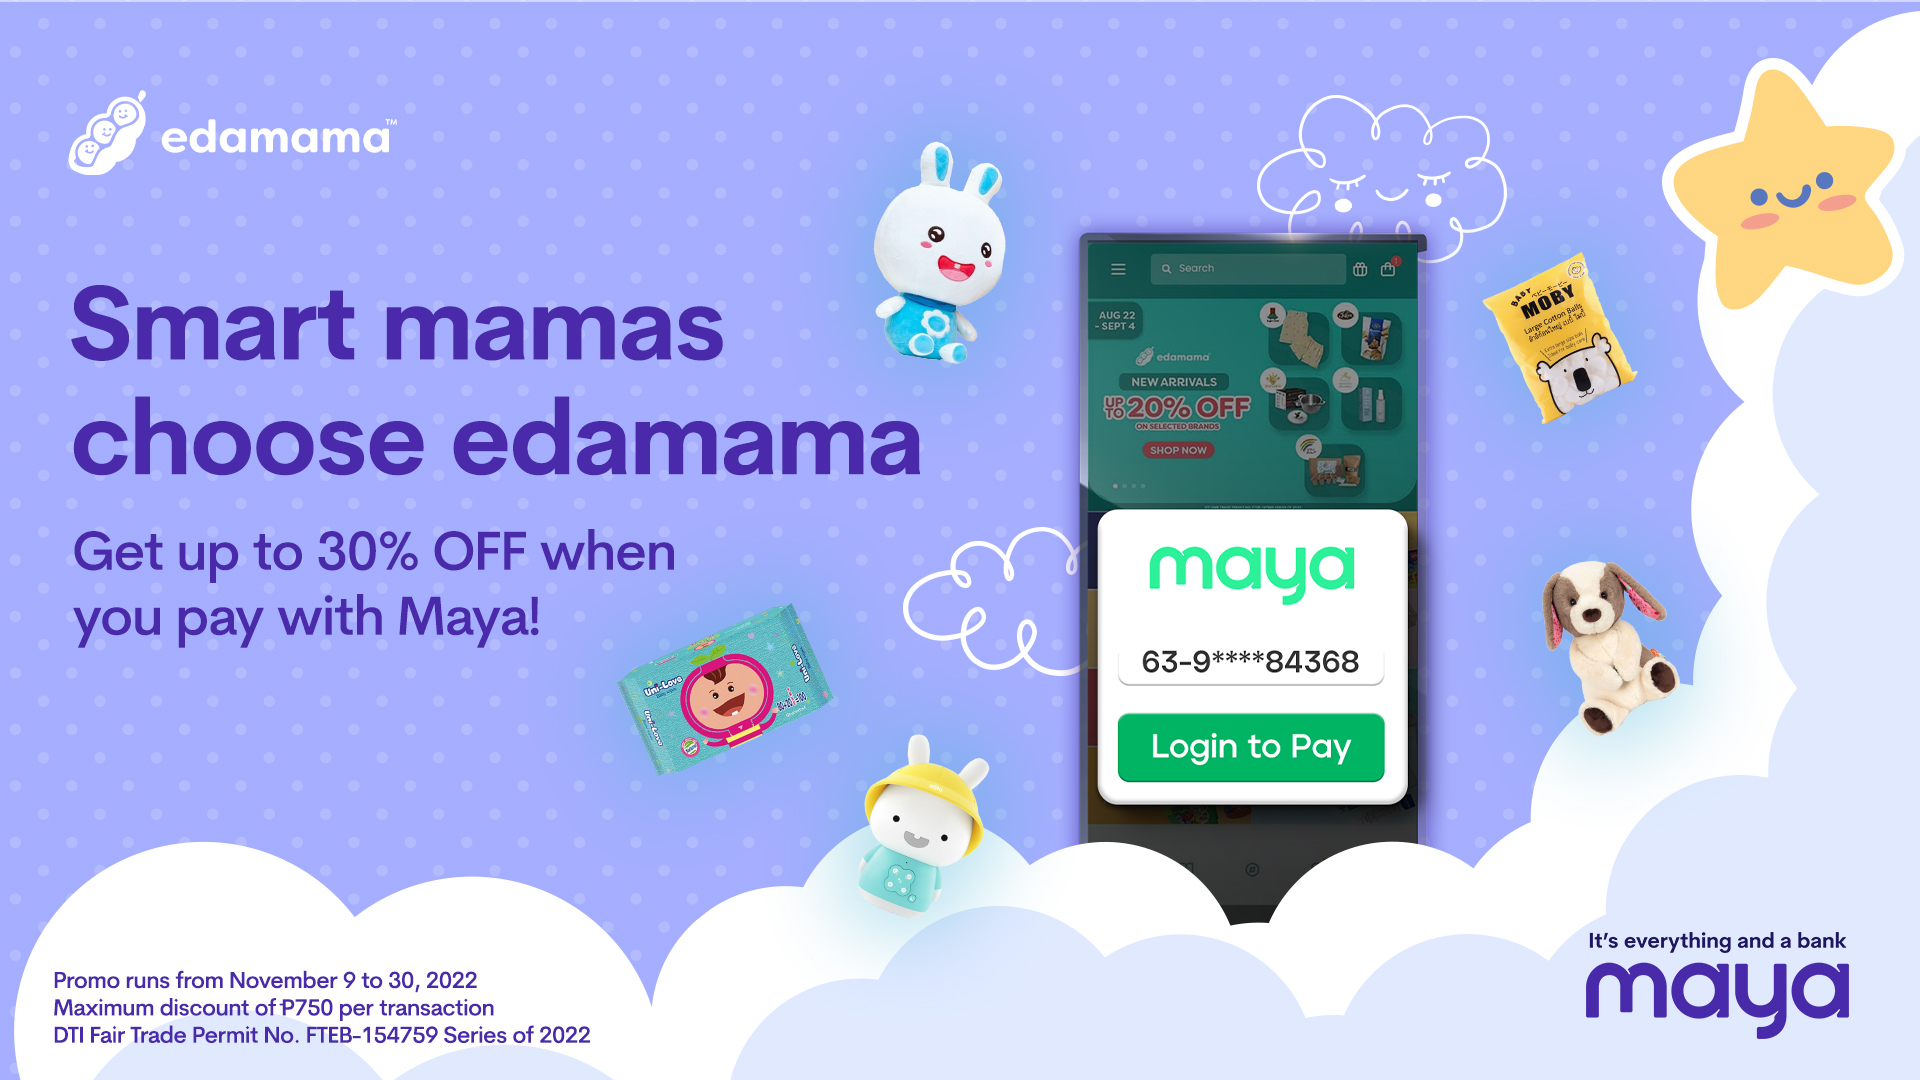 Enjoy up to 30% off at edamama when you pay with Maya!